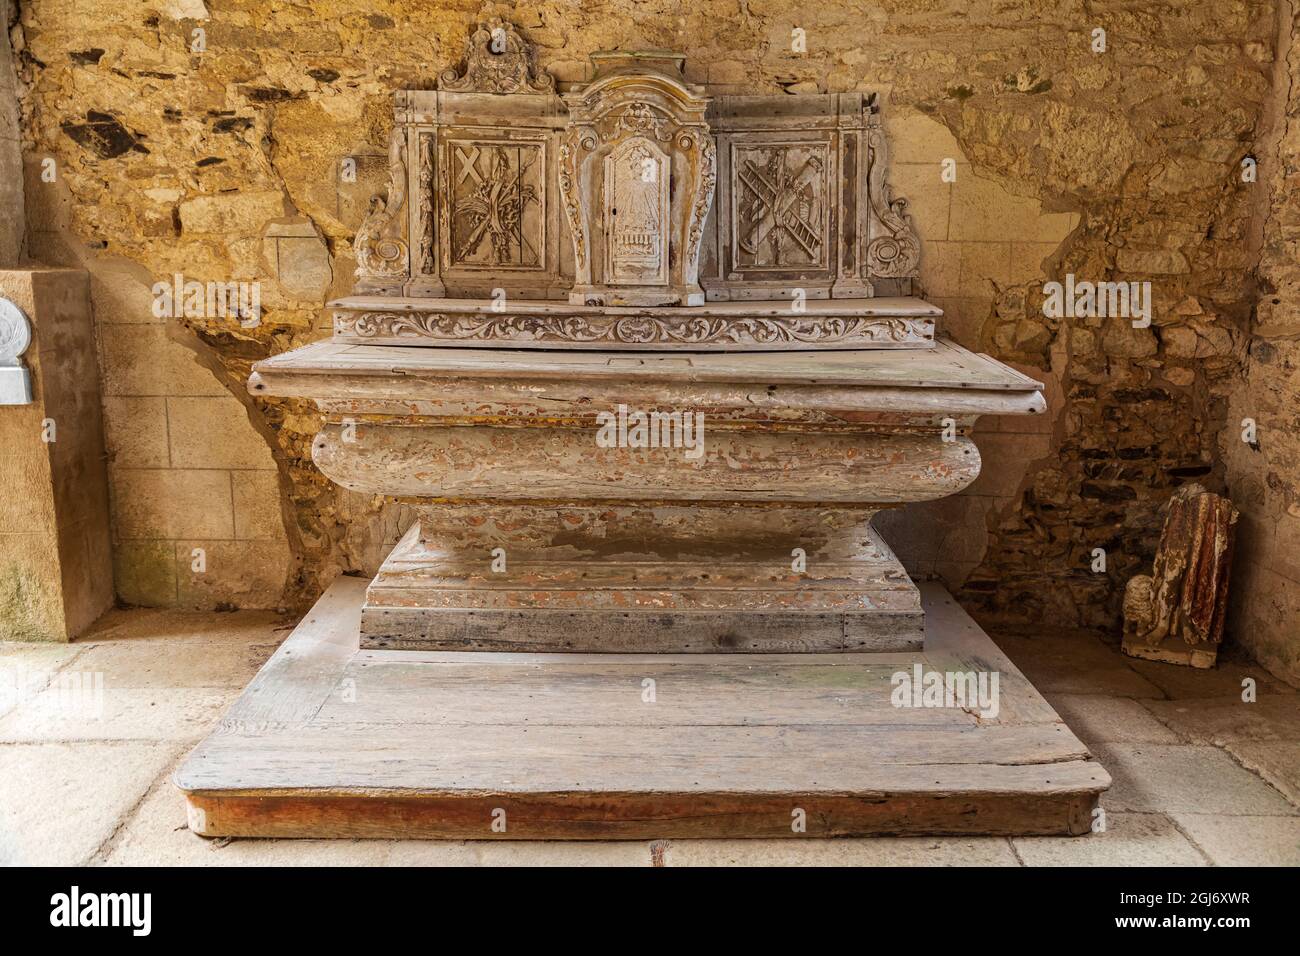 Europe, France, Haute-Vienne, Oradour-sur-Glane. Altar in the ruined stone church in the martyr village of Oradour-sur-Glane. (Editorial Use Only) Stock Photo